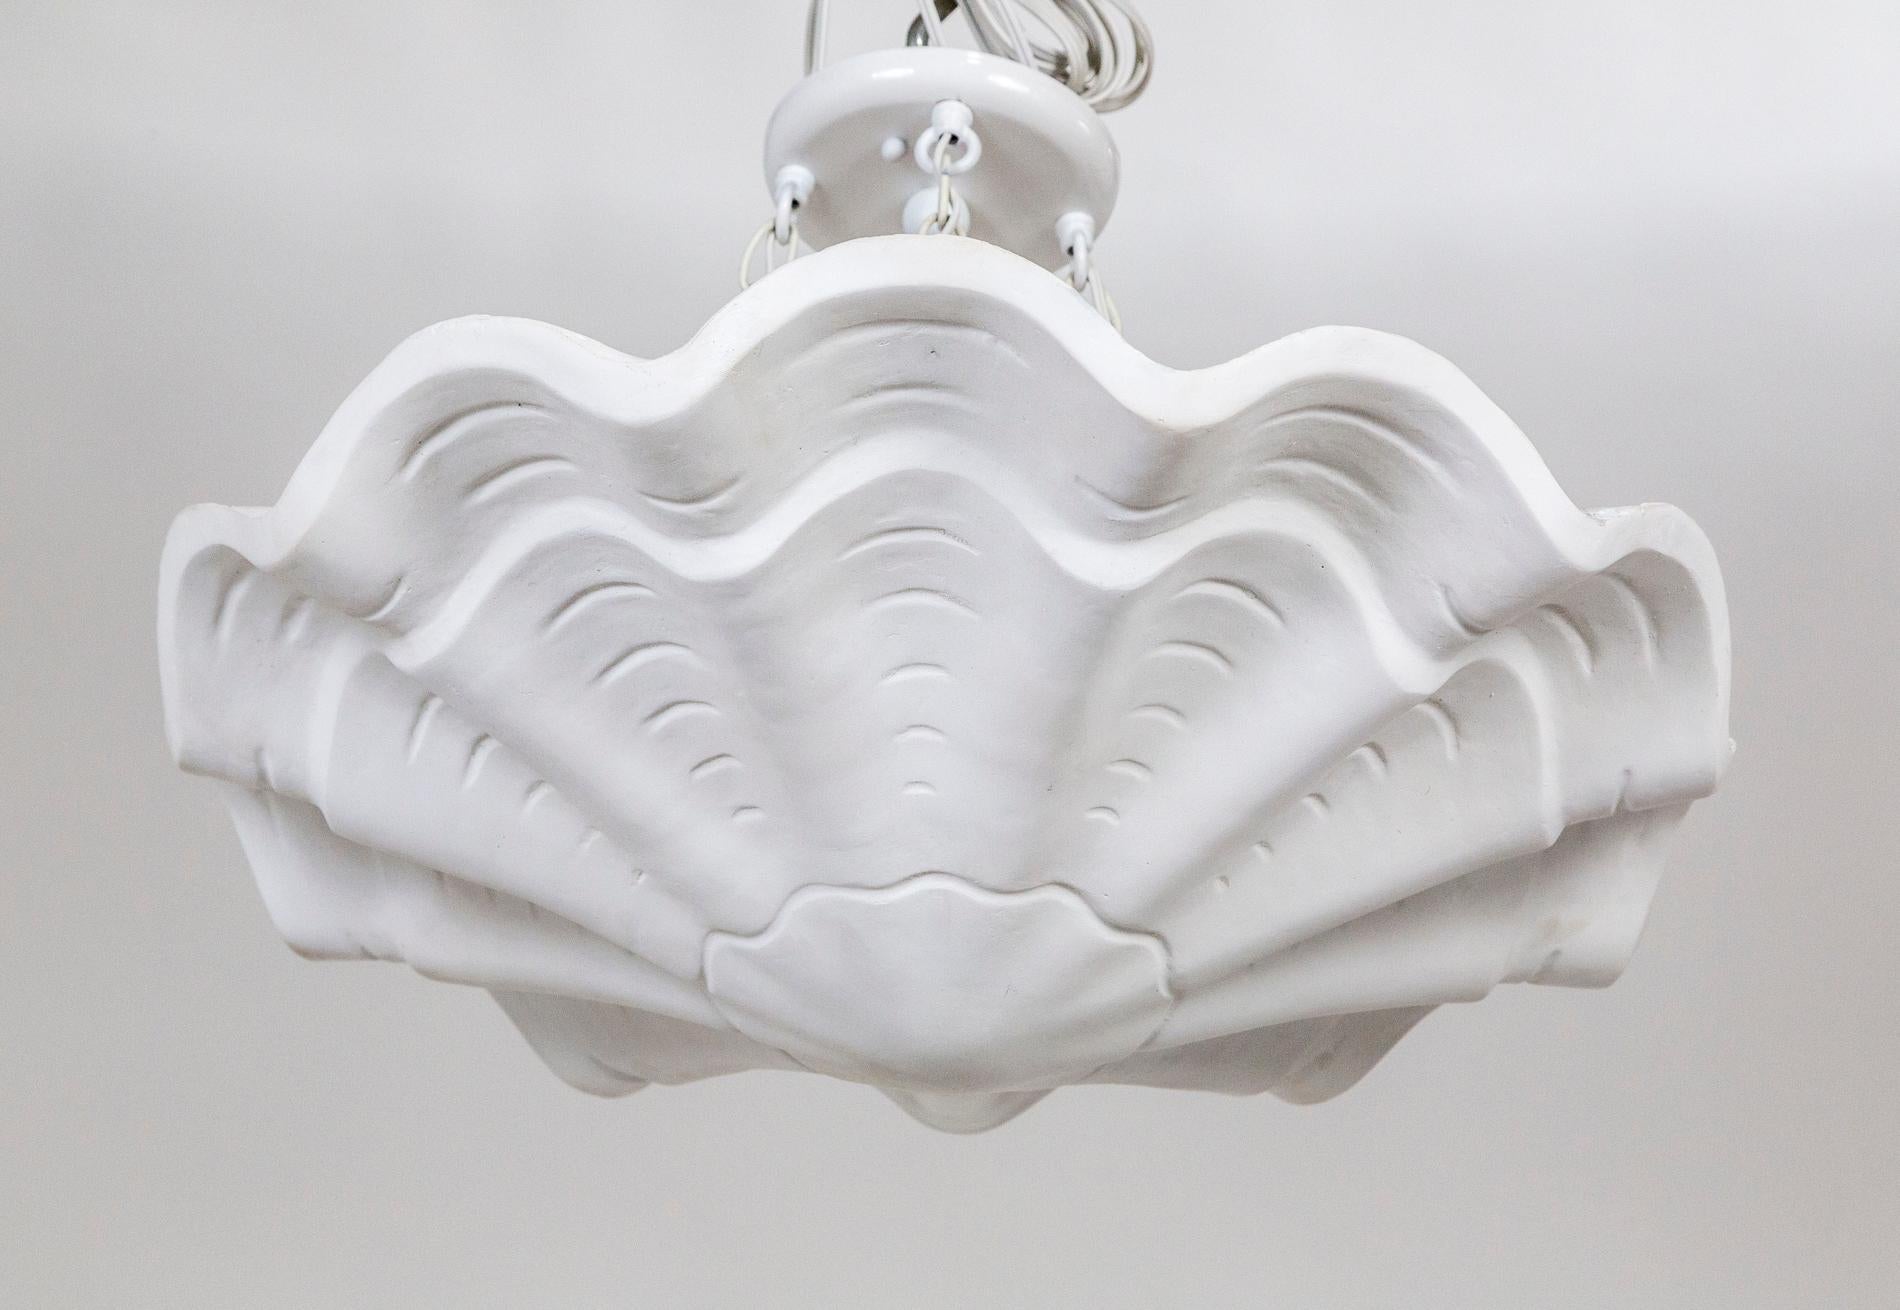 A plaster pendant in an undulating shell shape, with scalloped edges and imprinted lines accentuating the form. A newer take on Francis Elkins's 1940's plaster plafonnier. Hanging by four white chains; with 3 medium base ceramic sockets.